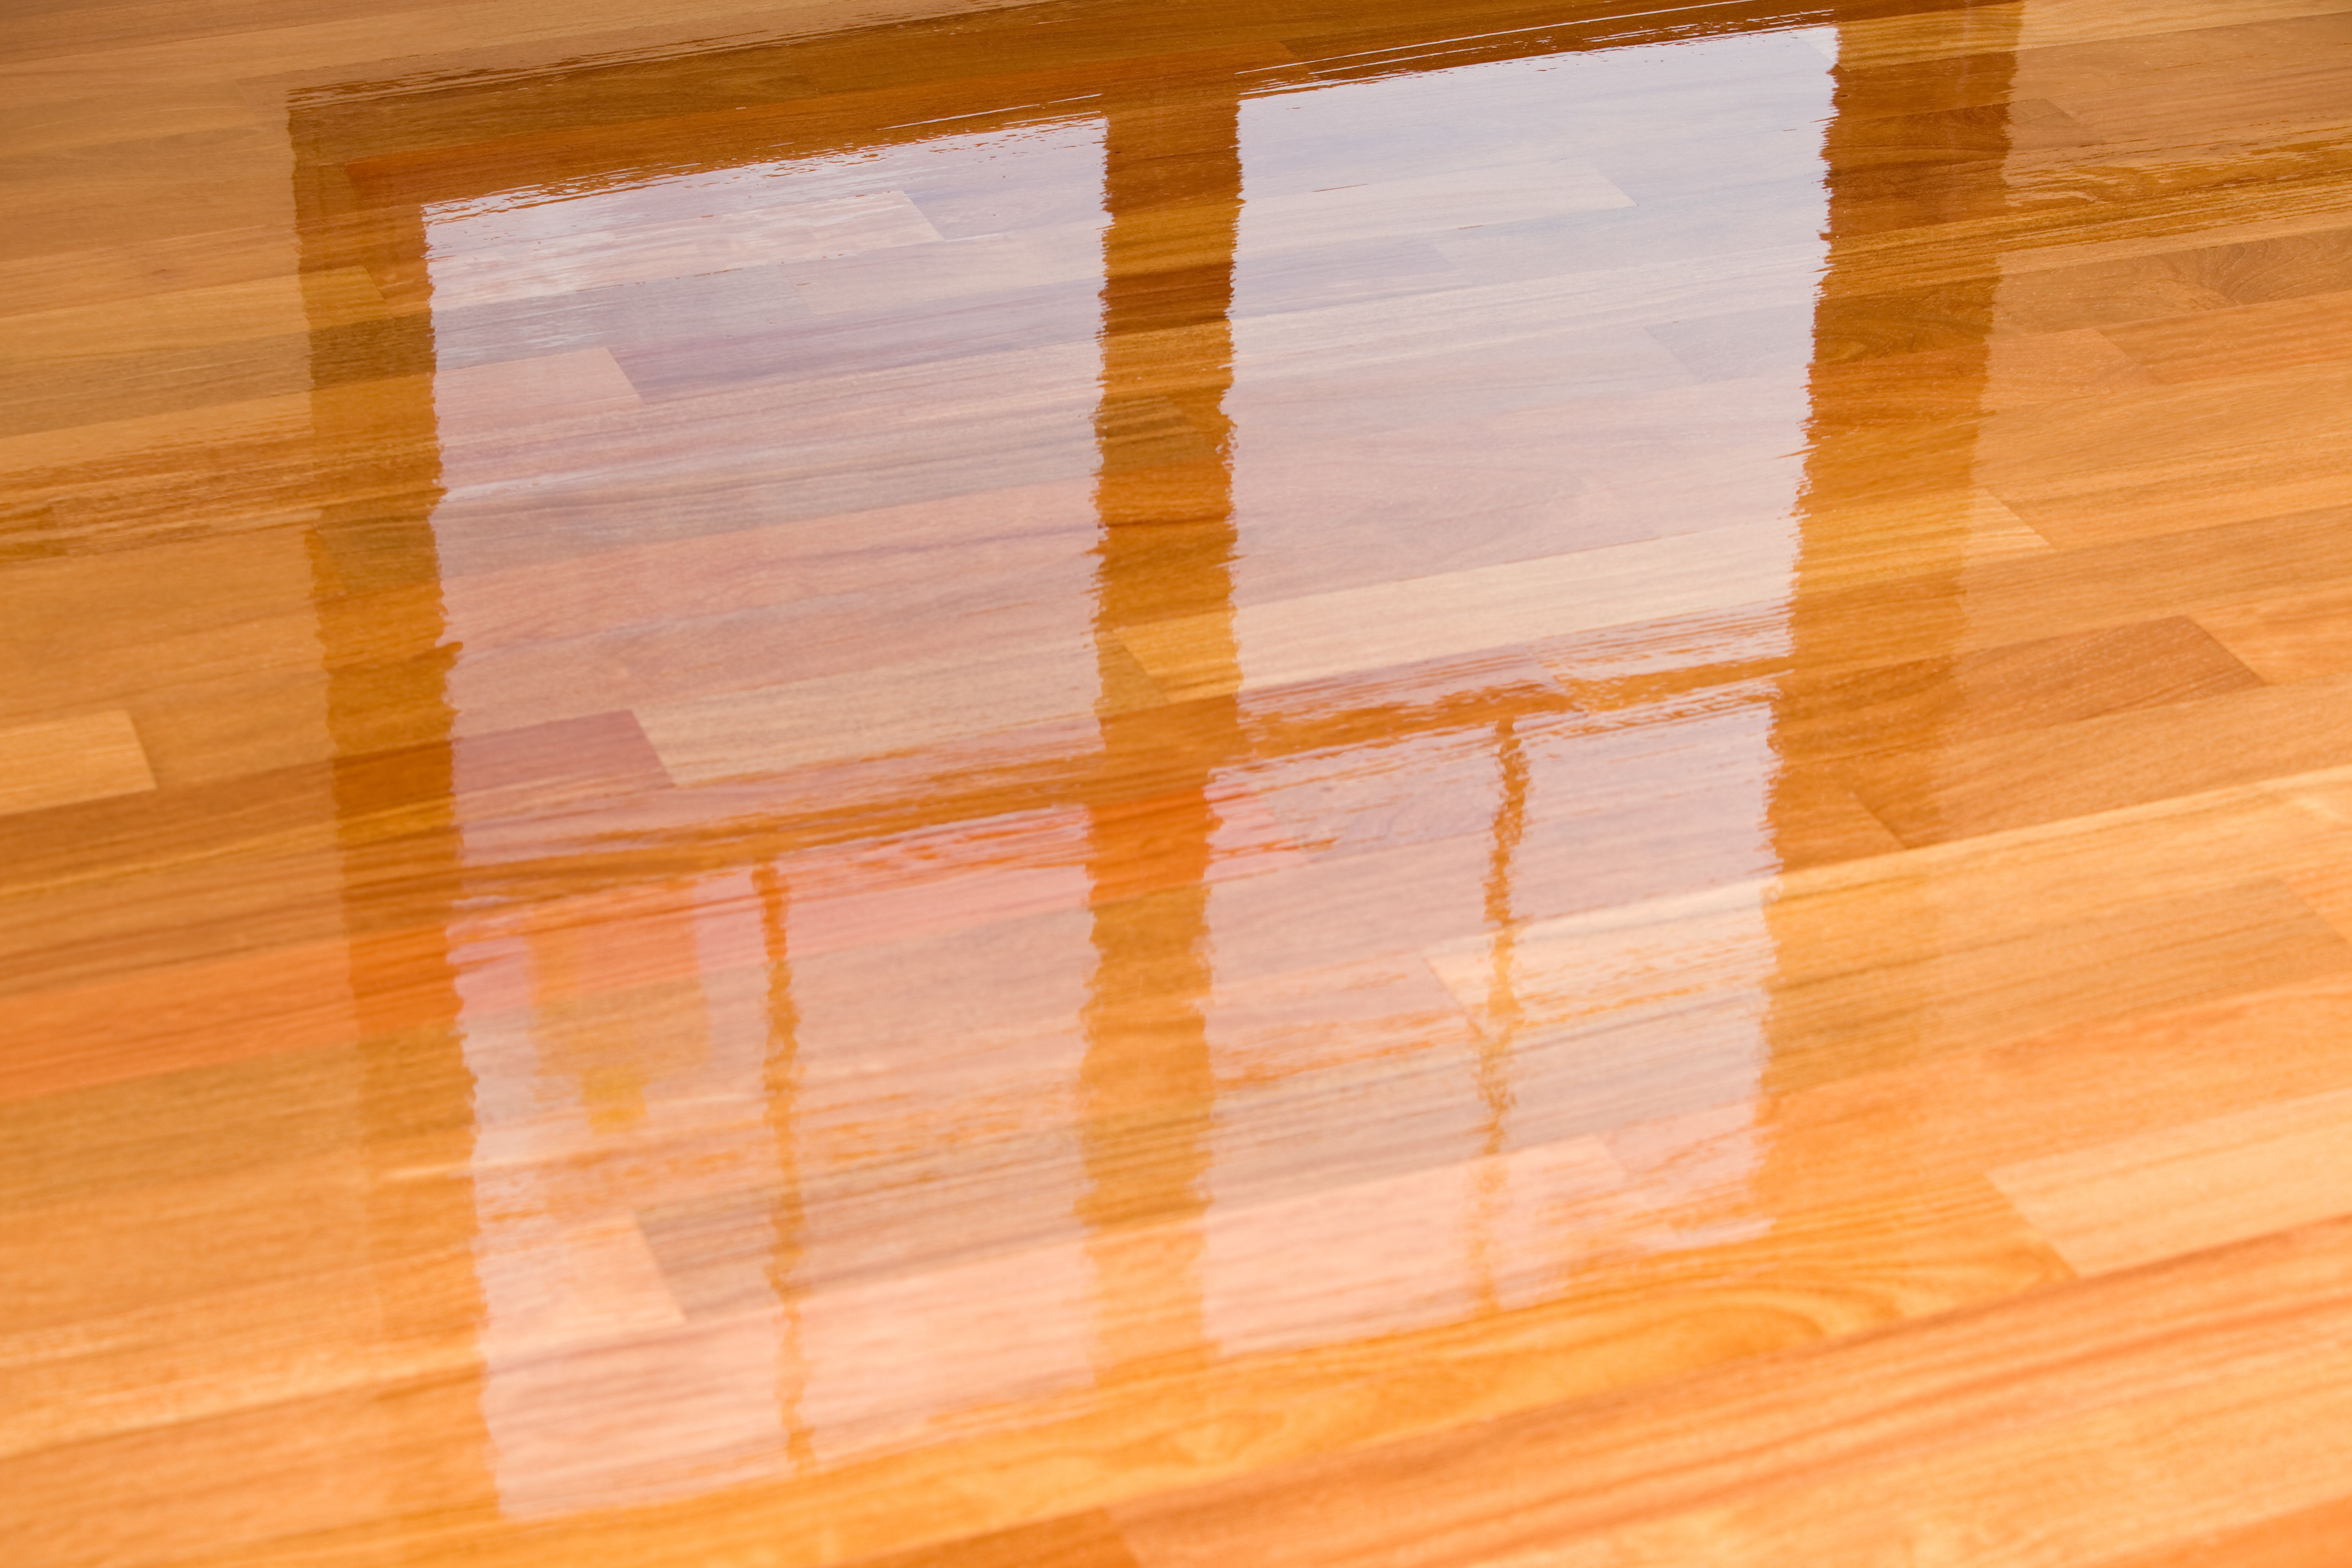 best hardwood floor sealer of guide to laminate flooring water and damage repair intended for wet polyurethane on new hardwood floor with window reflection 183846705 582e34da3df78c6f6a403968